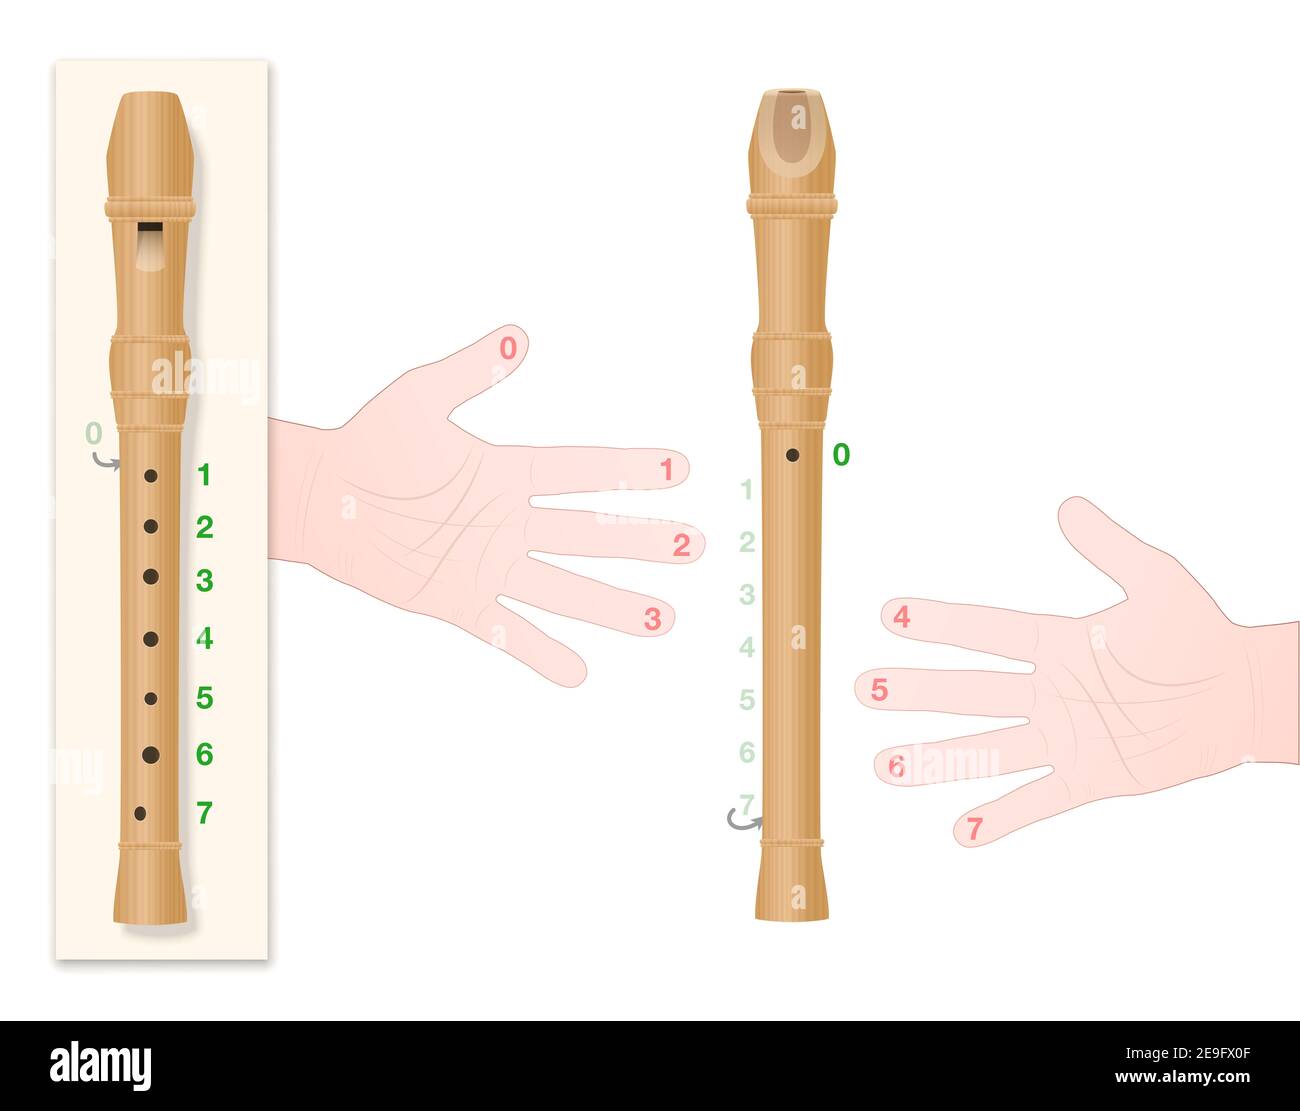 Recorder with correct hand position, numbered fingers and corresponding holes of the instrument to learn to play this music properly. Stock Photo